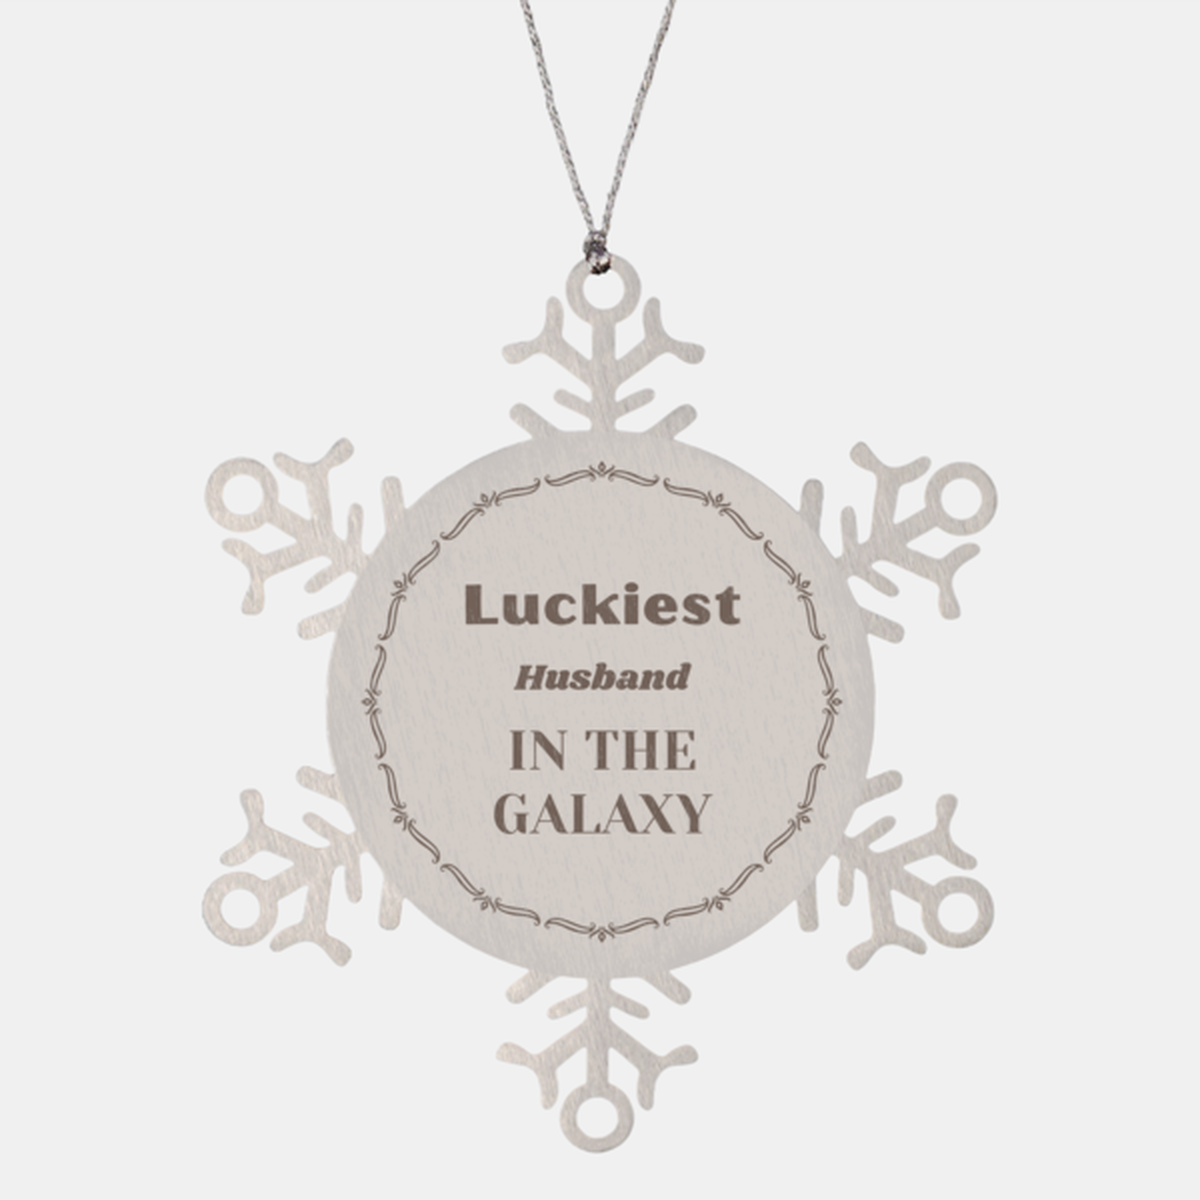 Luckiest Husband in the Galaxy, To My Husband Ornament Gifts, Christmas Husband Snowflake Ornament Gifts, X-mas Decorations Unique Gifts For Husband Men Women